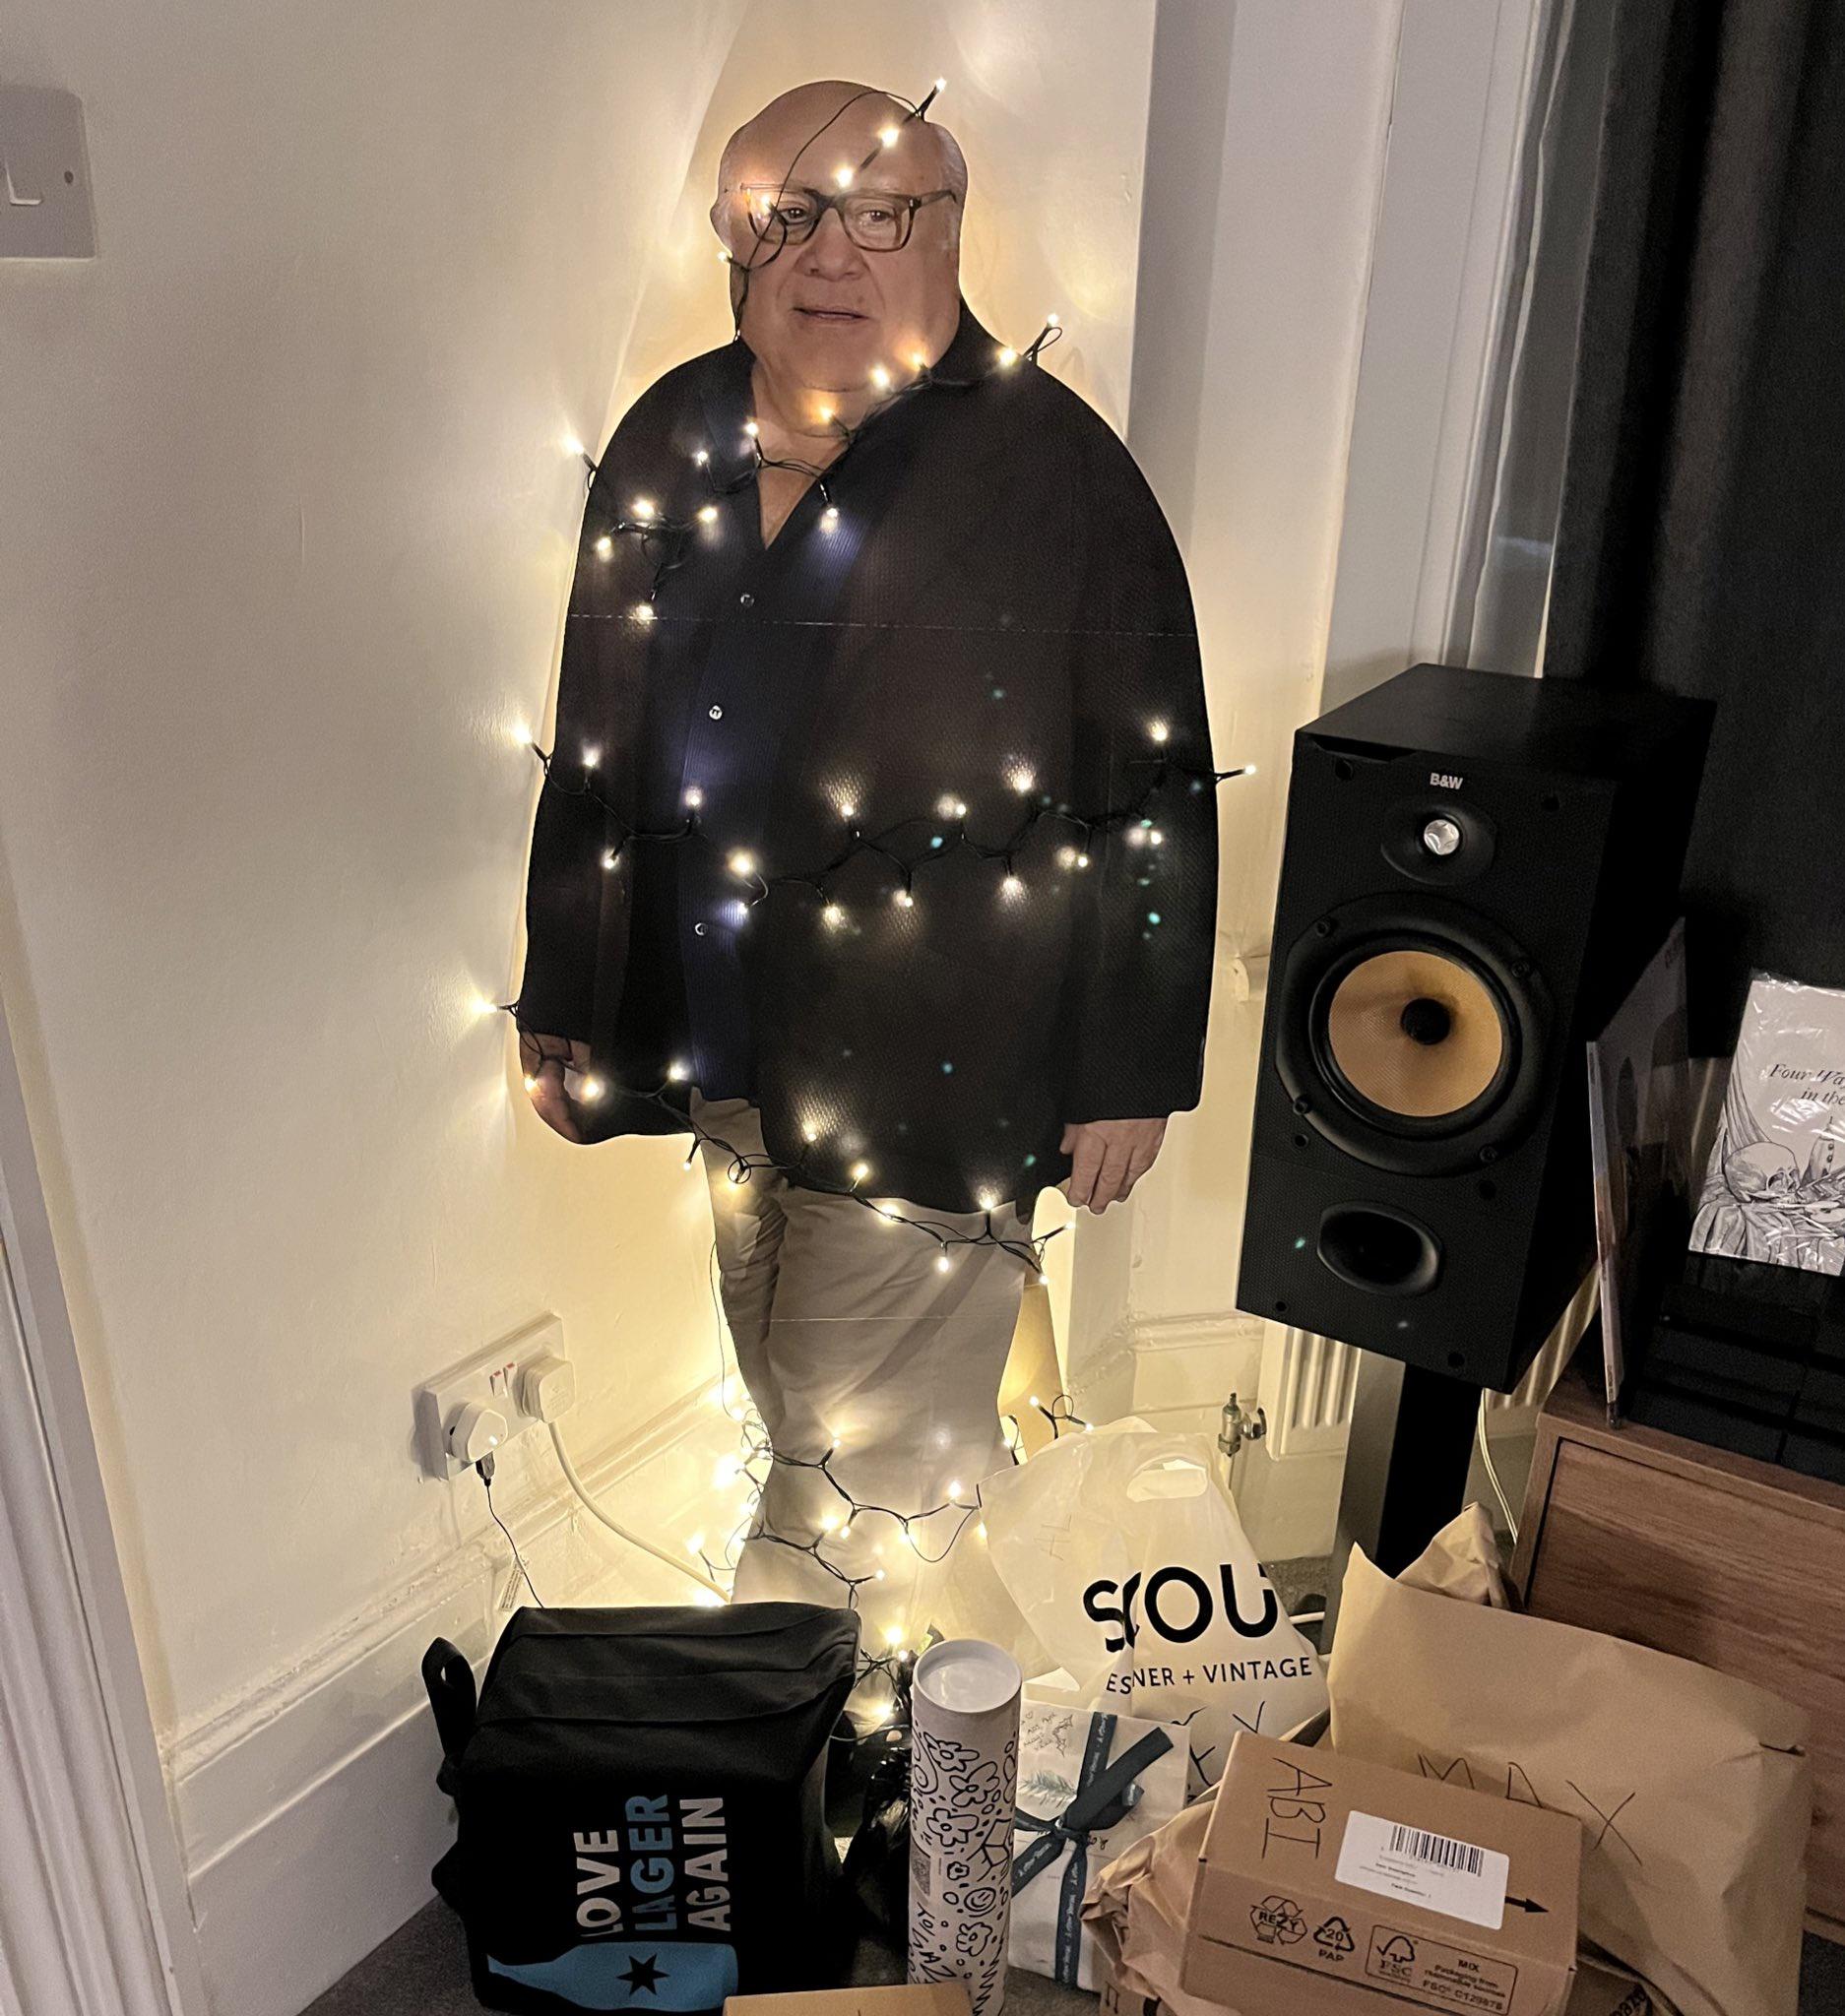 We don’t bear a christmas tree so we spend danny devito.